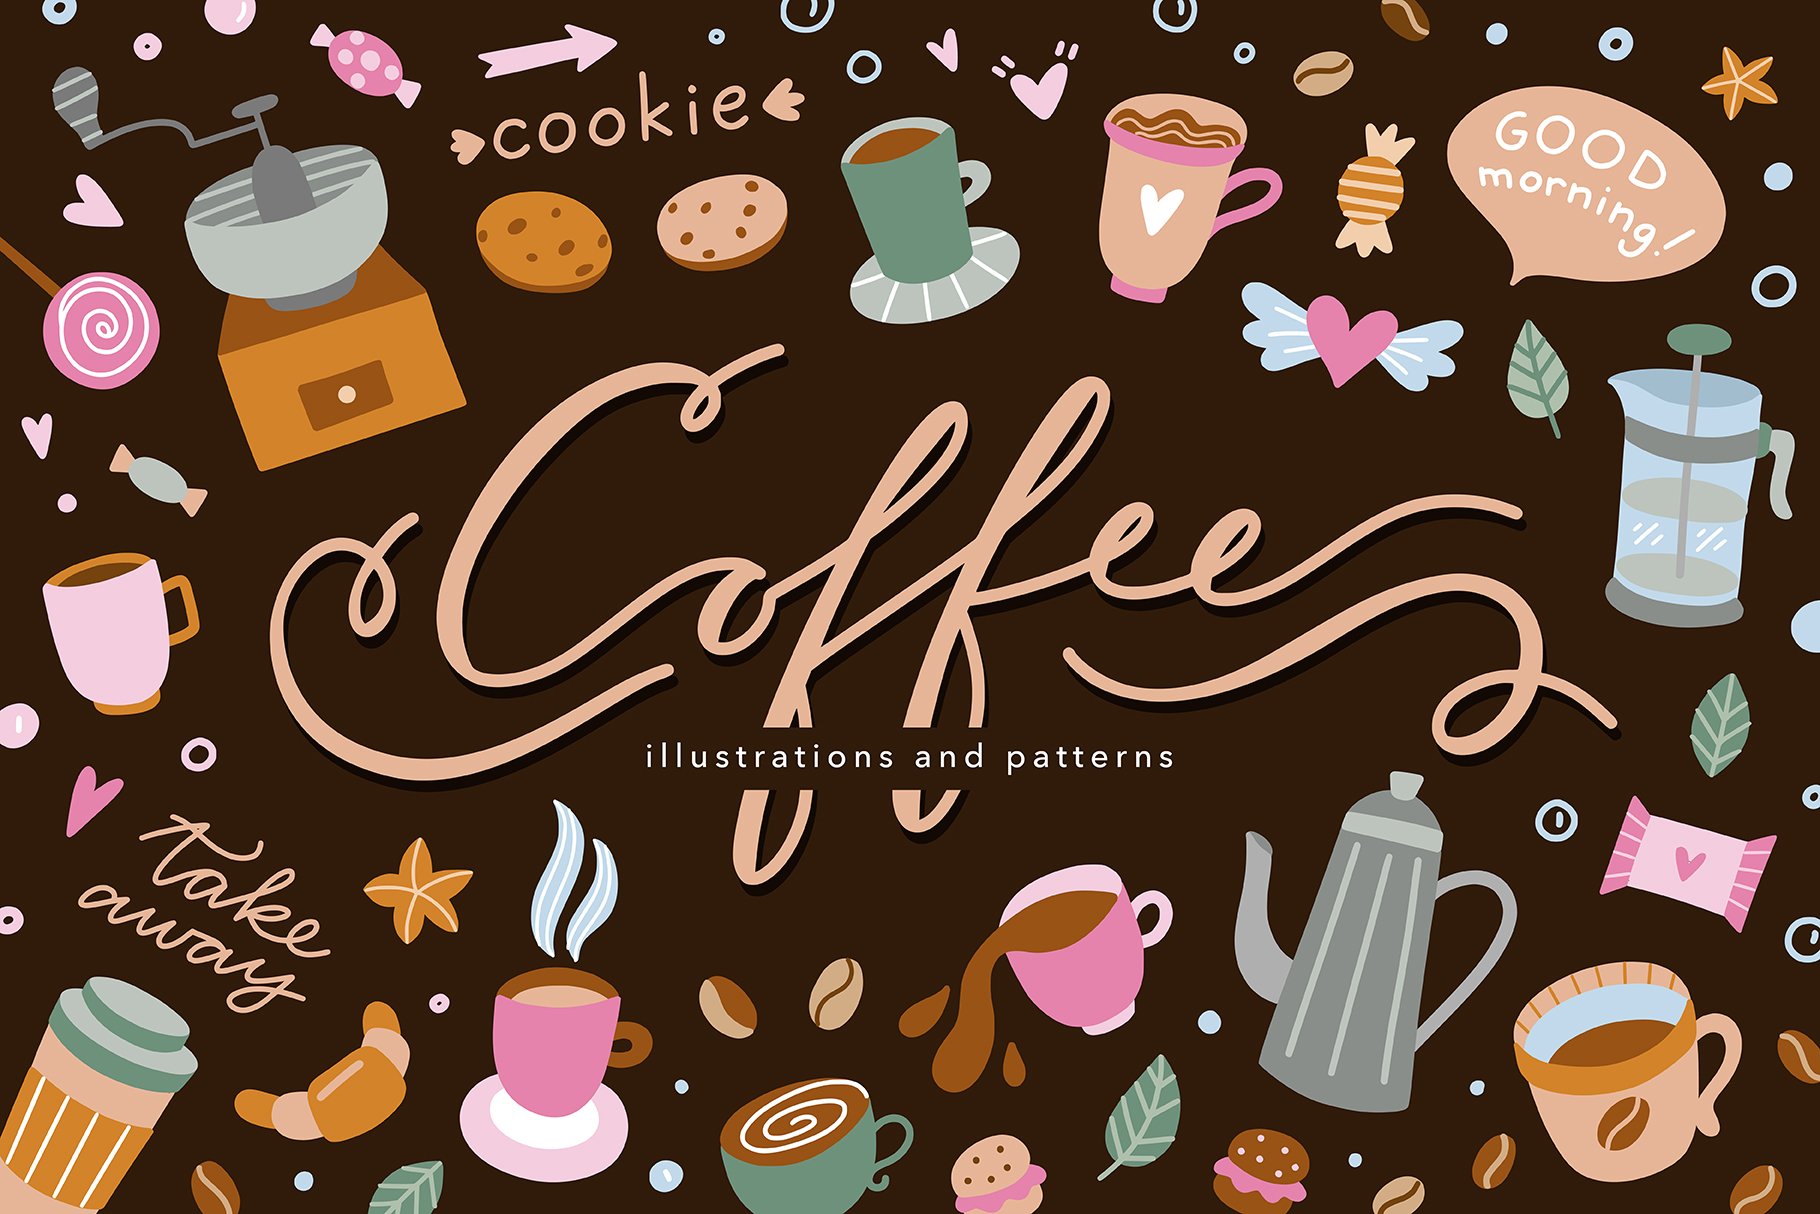 Coffee Illustrations & Patterns cover image.